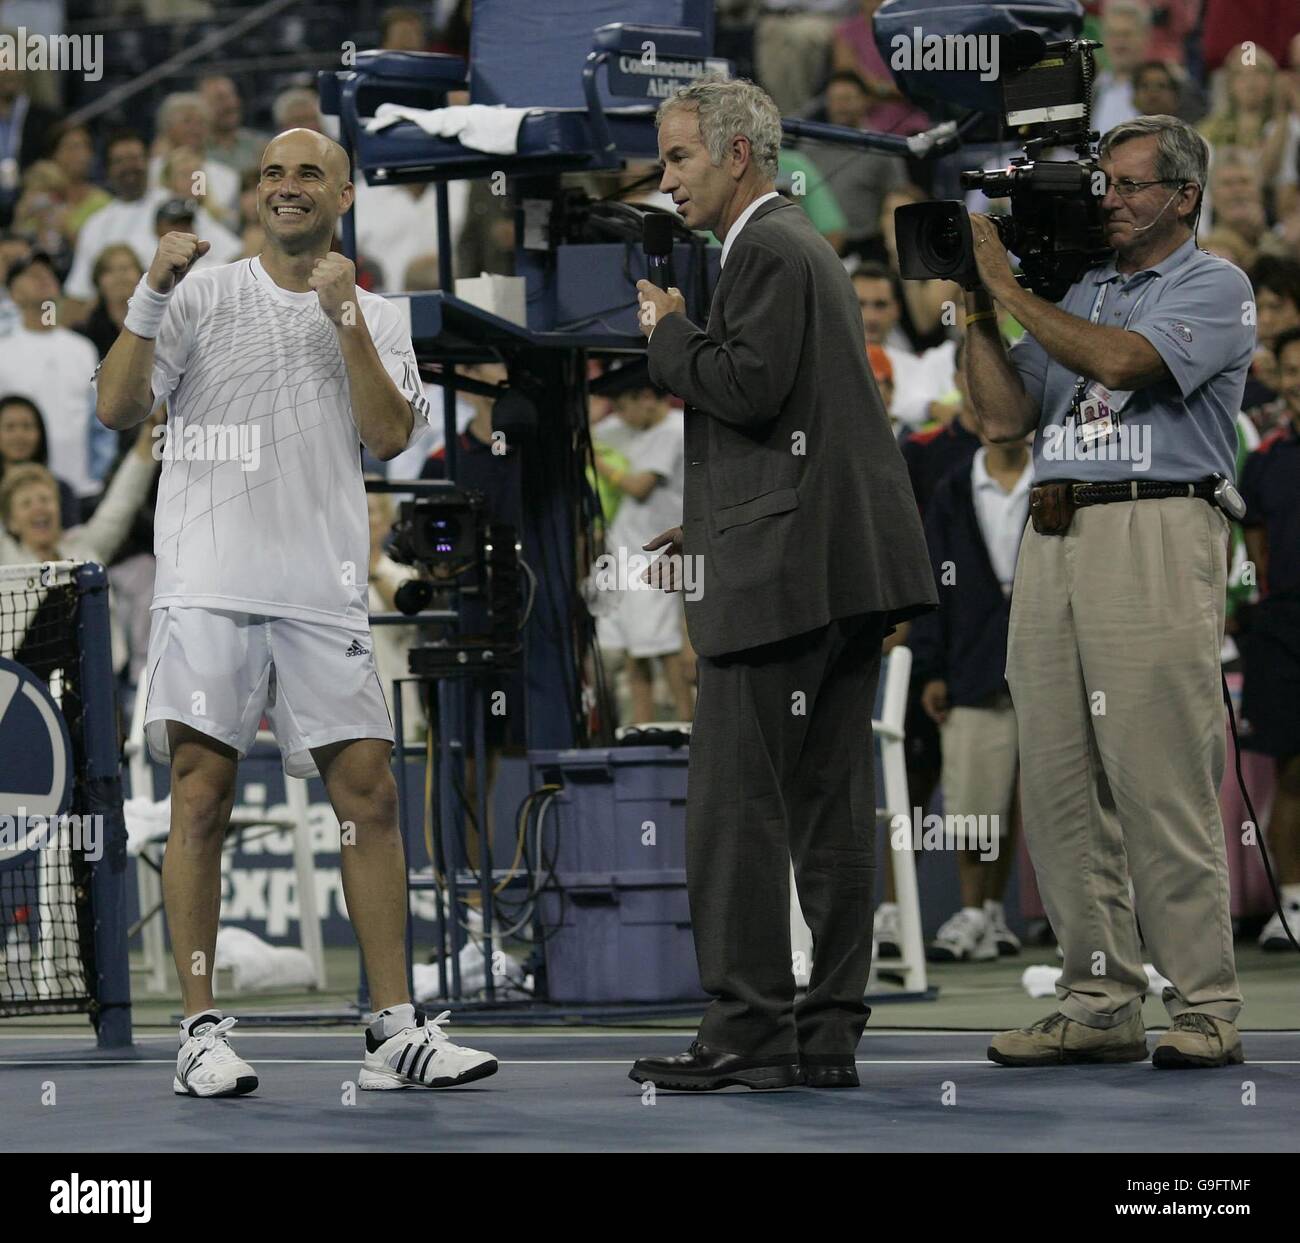 An emotional Andre Agassi (left) celebrates after winning his first round match against Andrei Pavel during the US Open at Flushing Meadow, New York. After the tournament he is to retire from tennis. Stock Photo